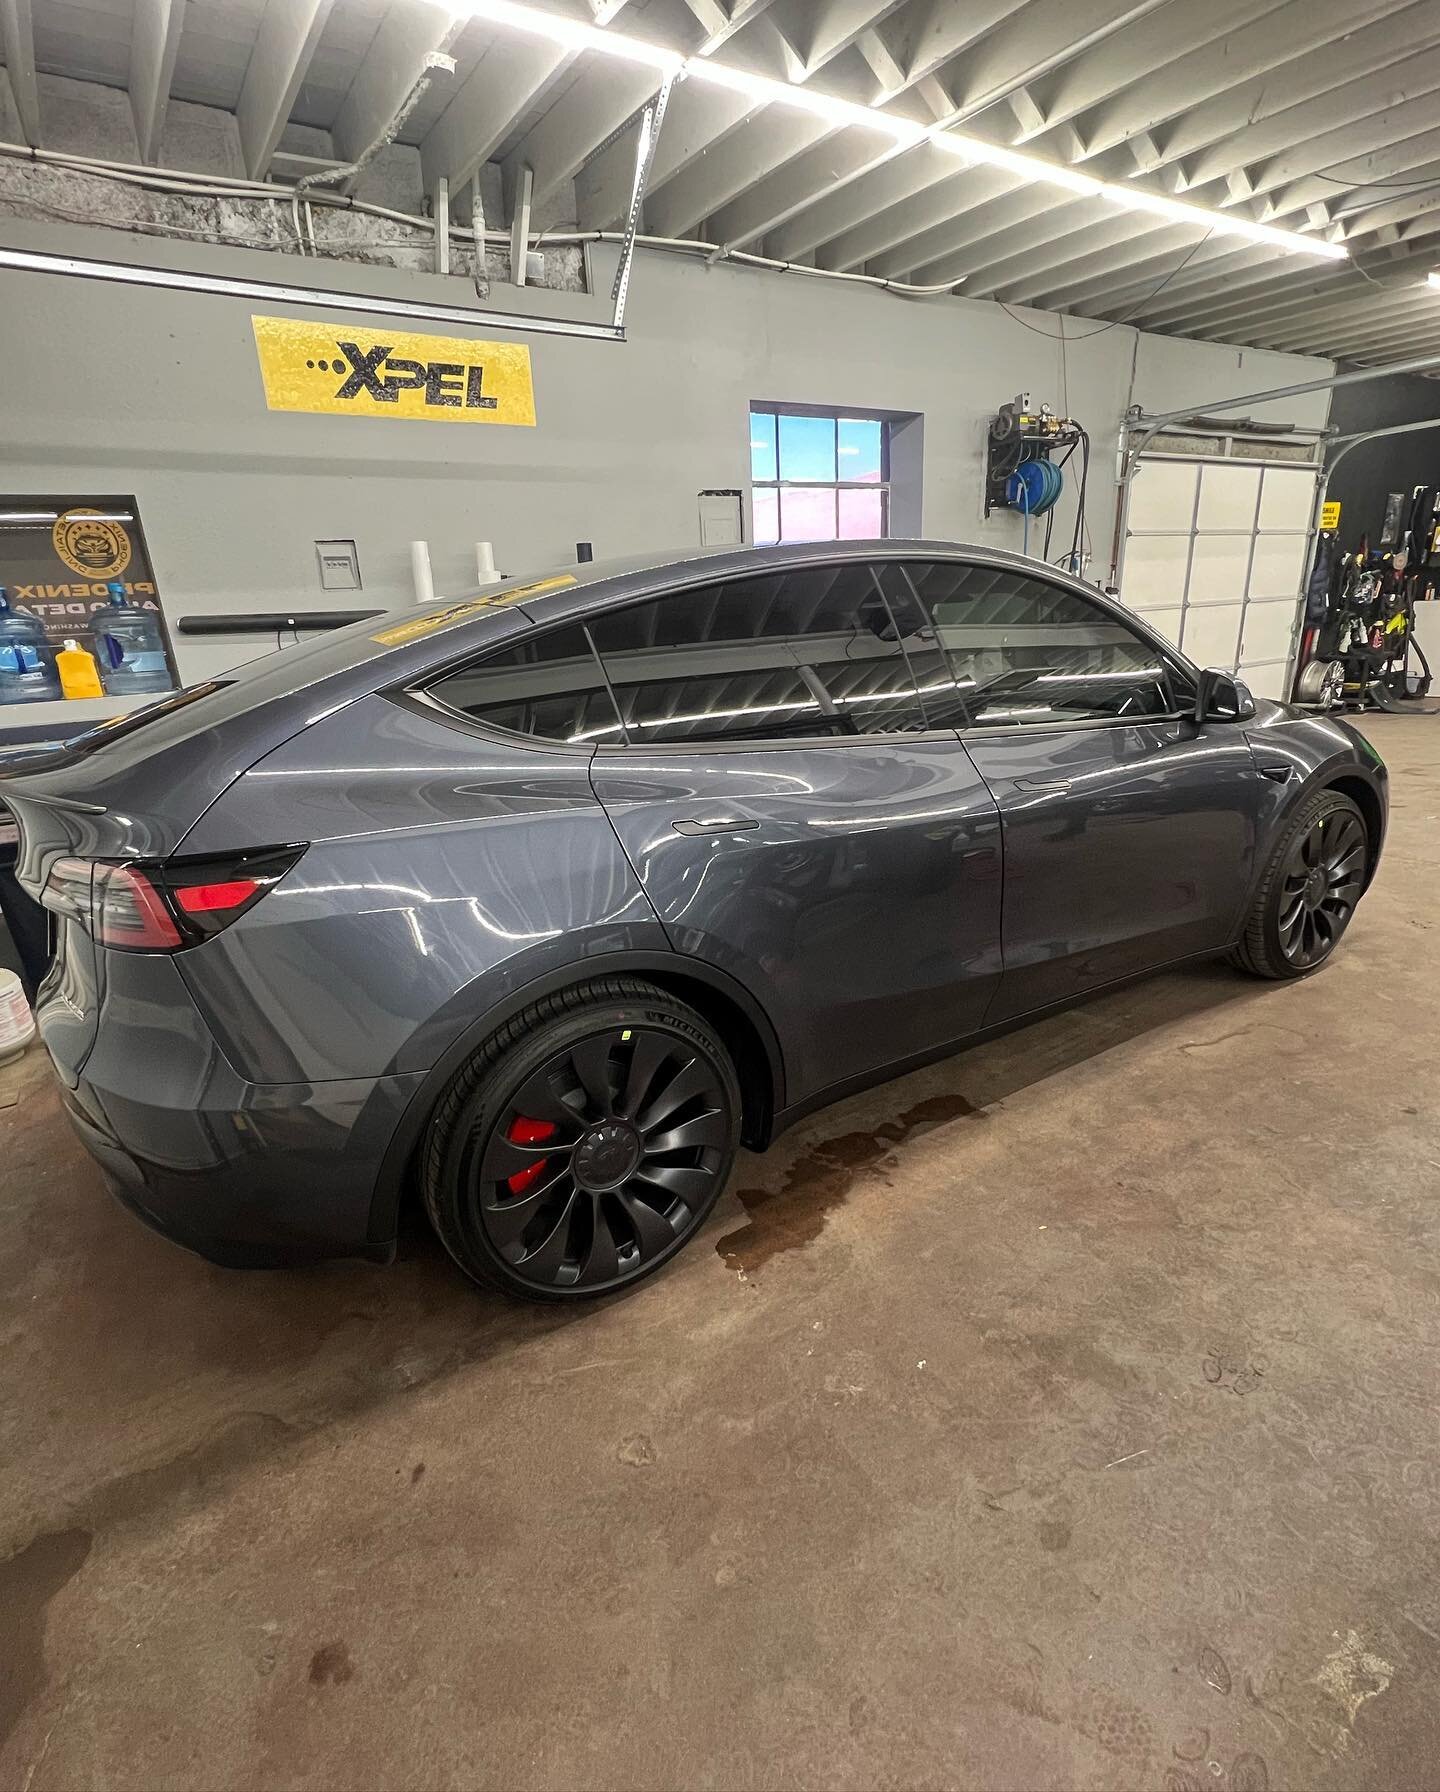 Upgrading the look of this 2023 Tesla Model Y. This Model Y received 15% XPEL Prime XR on the front windows and 5% Xpel Prime XR on the rear windows. The Xpel Prime XR is blocking 88% of infrared heat and 99% of UV rays from coming through the vehicl